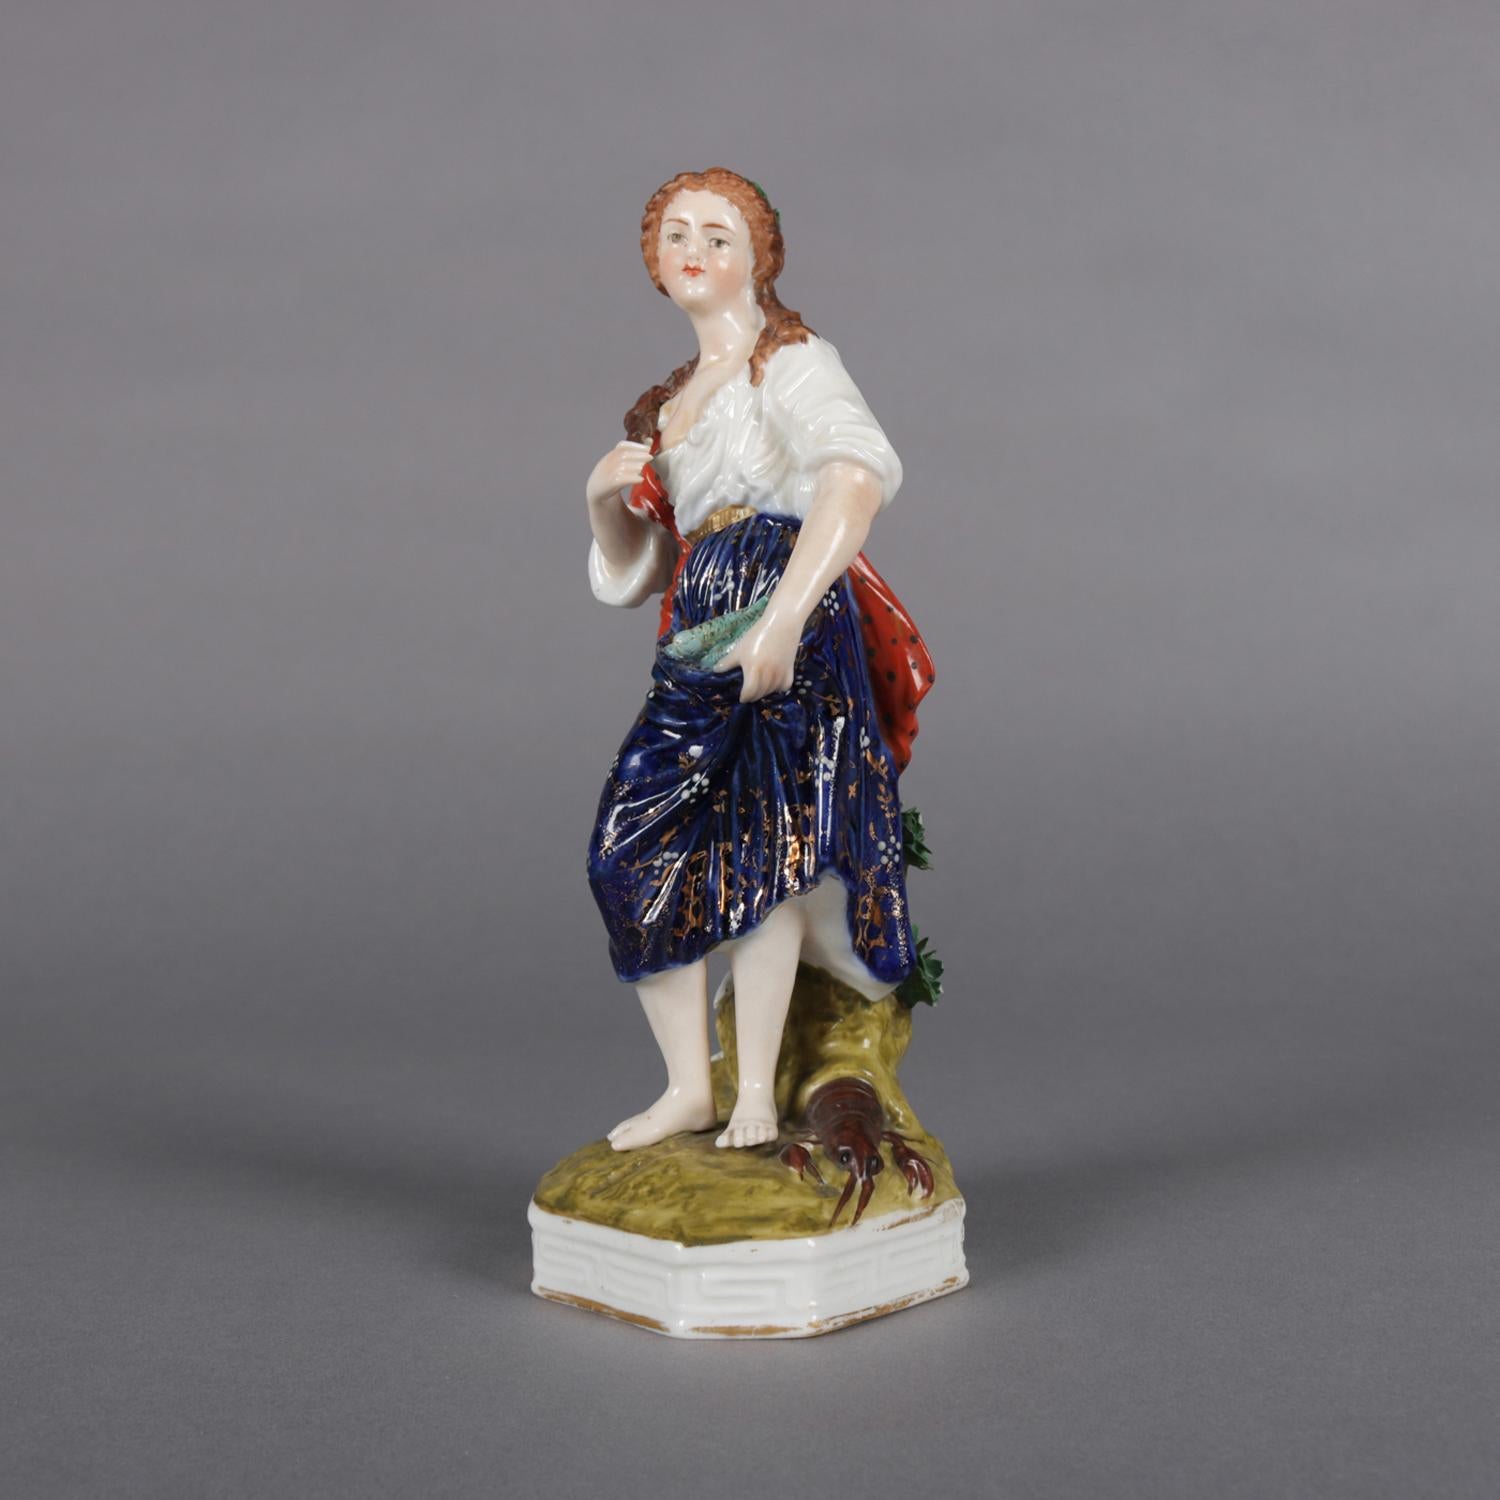 Antique Meissen school porcelain figure of peasant maiden with her catch of fish in seashore setting features hand painted decoration with gilt highlights, red crown mark on back as photographed, circa 1880

Measures: 8